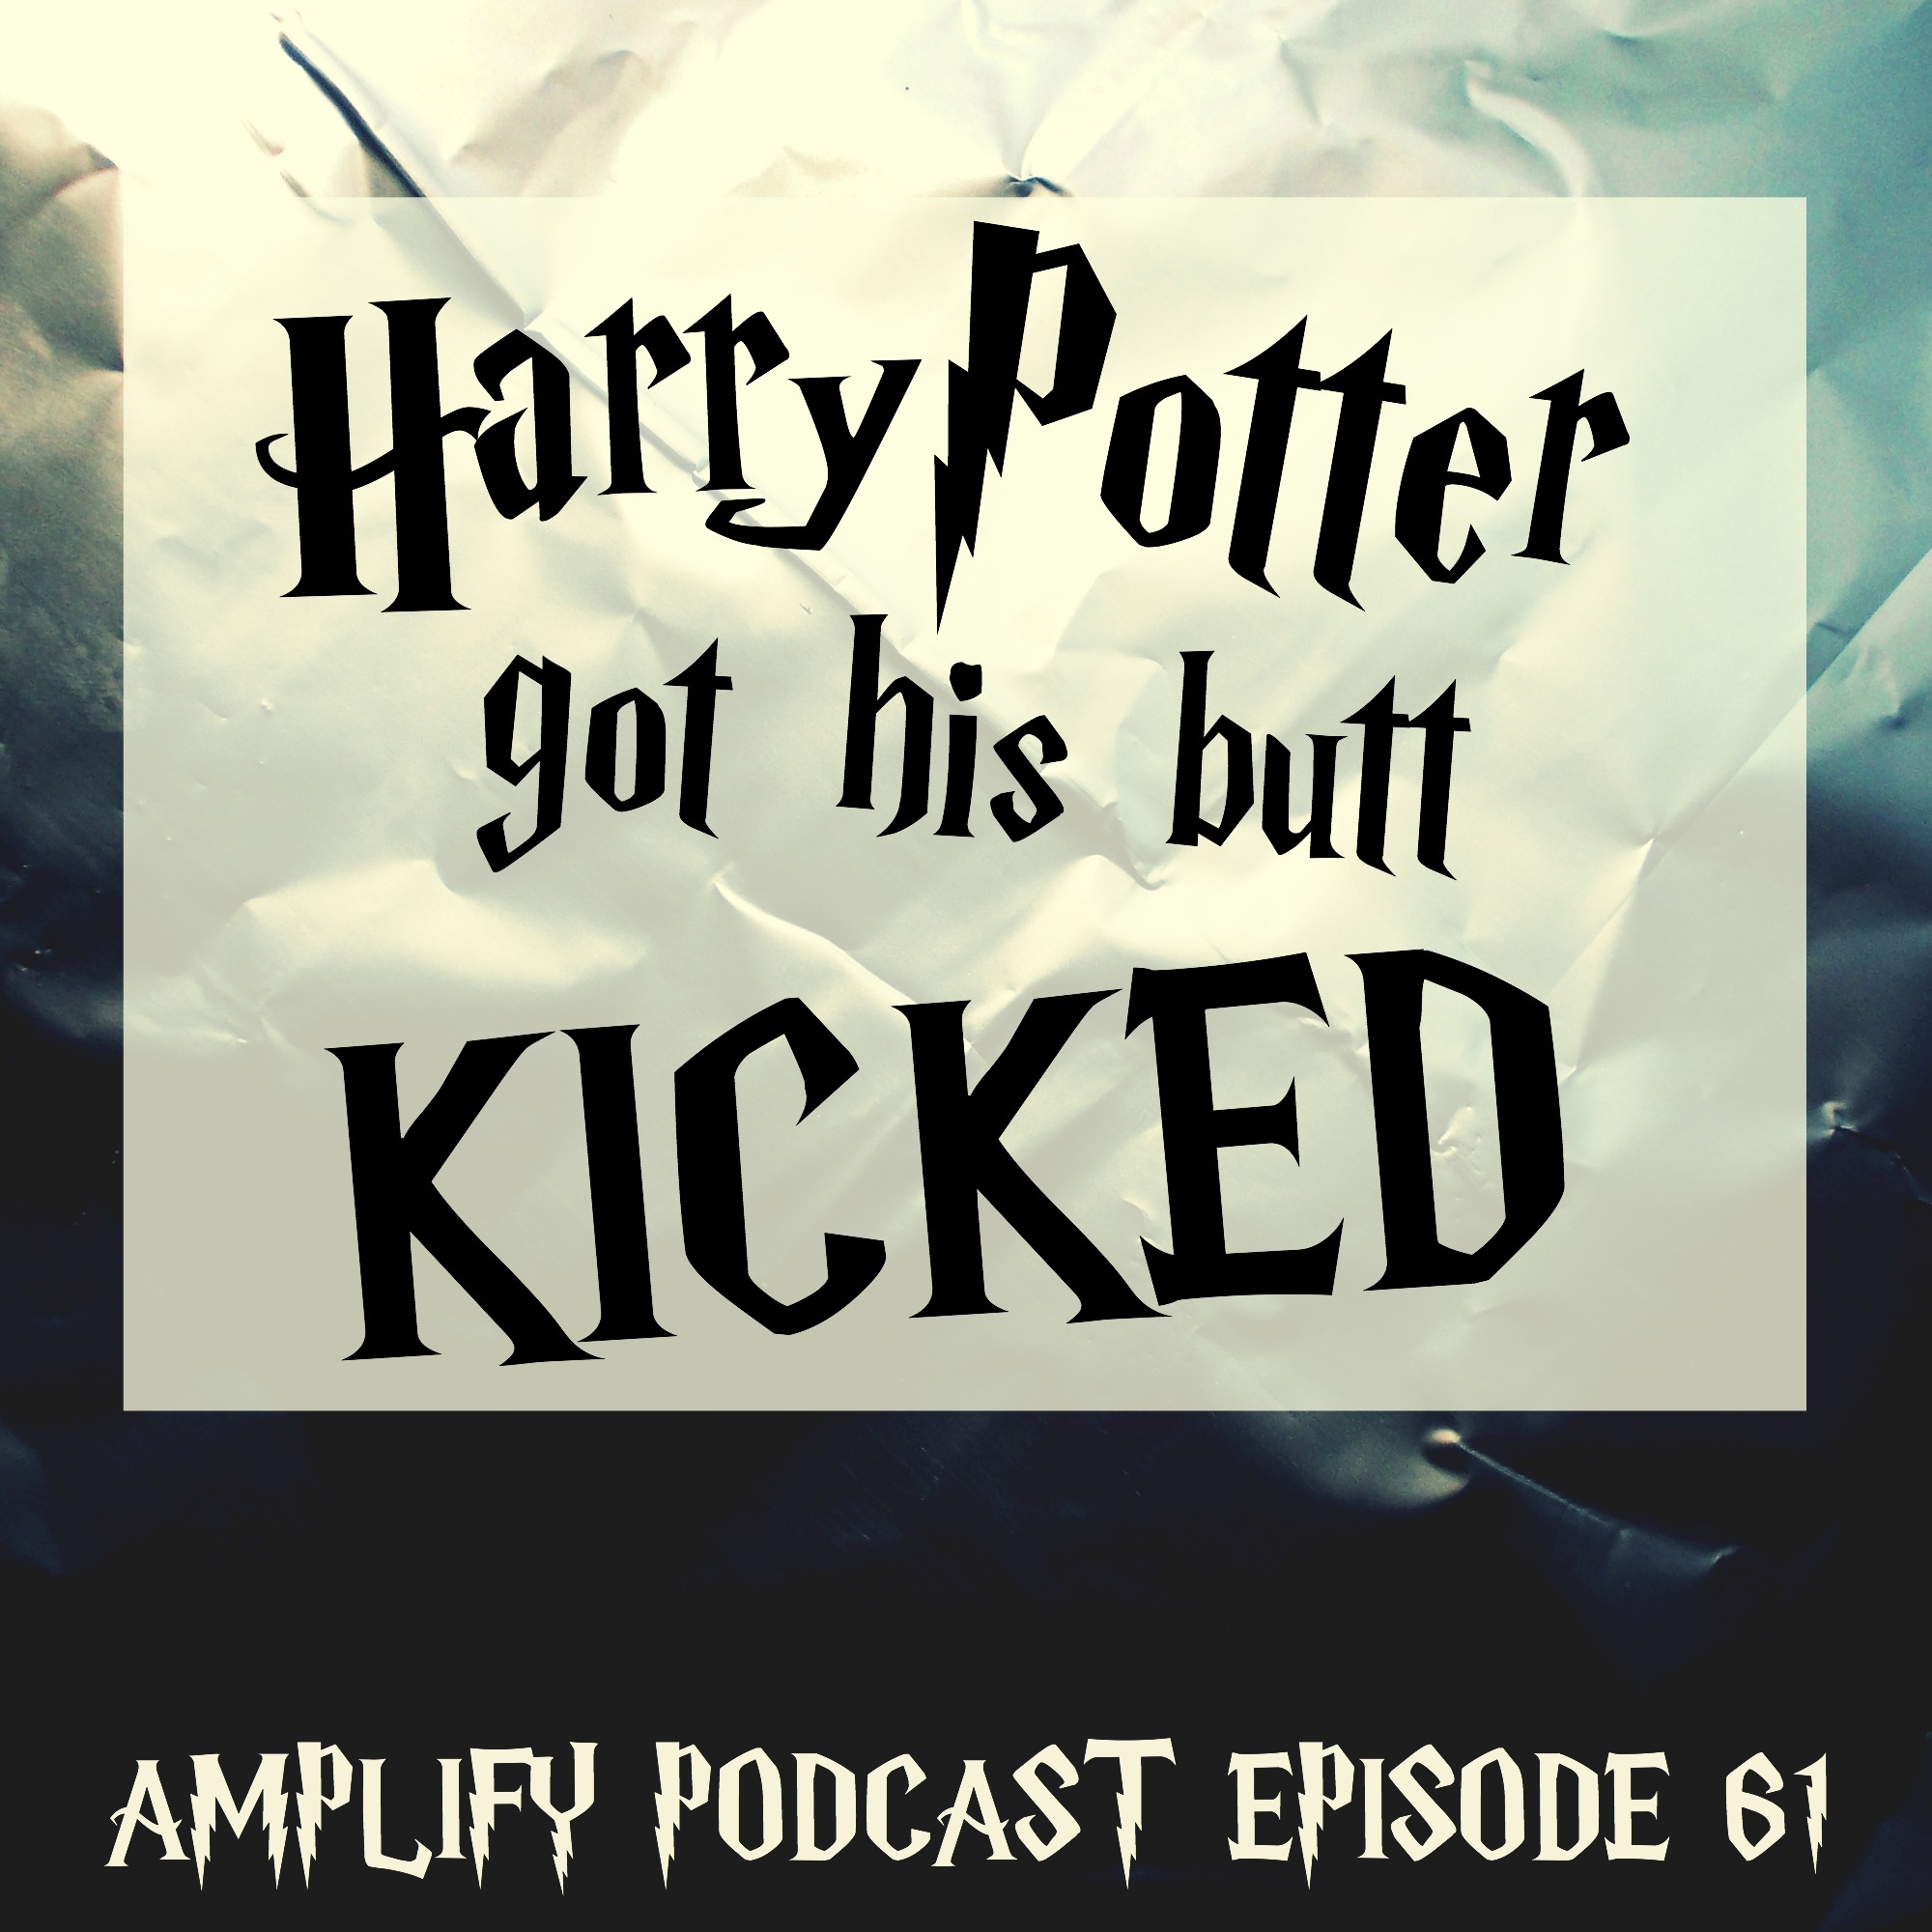 You are currently viewing Harry Potter got his butt kicked